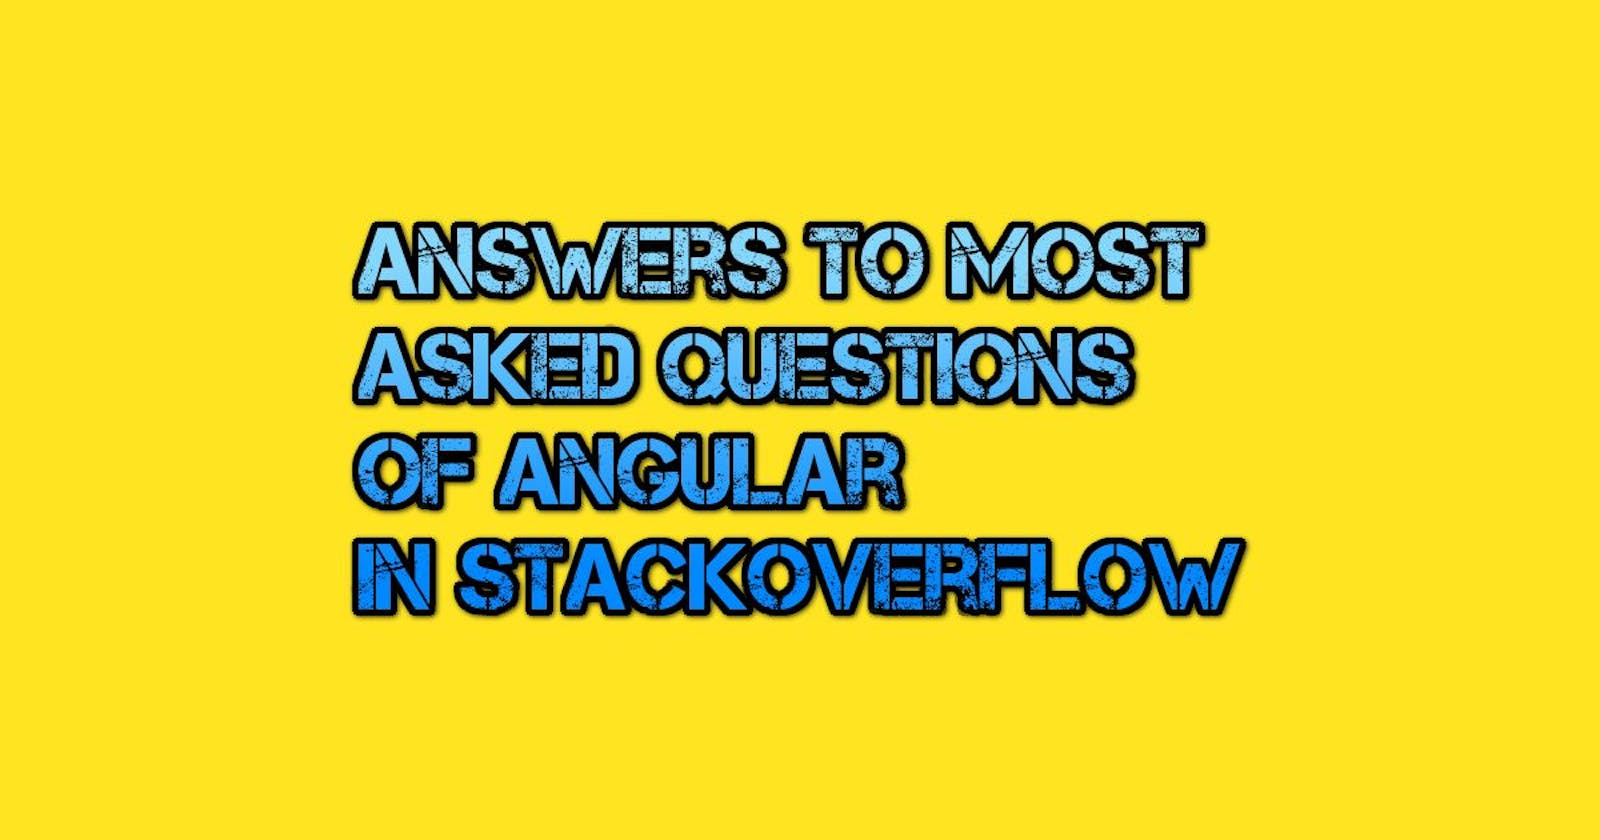 Answers to most asked questions of Angular in StackOverflow